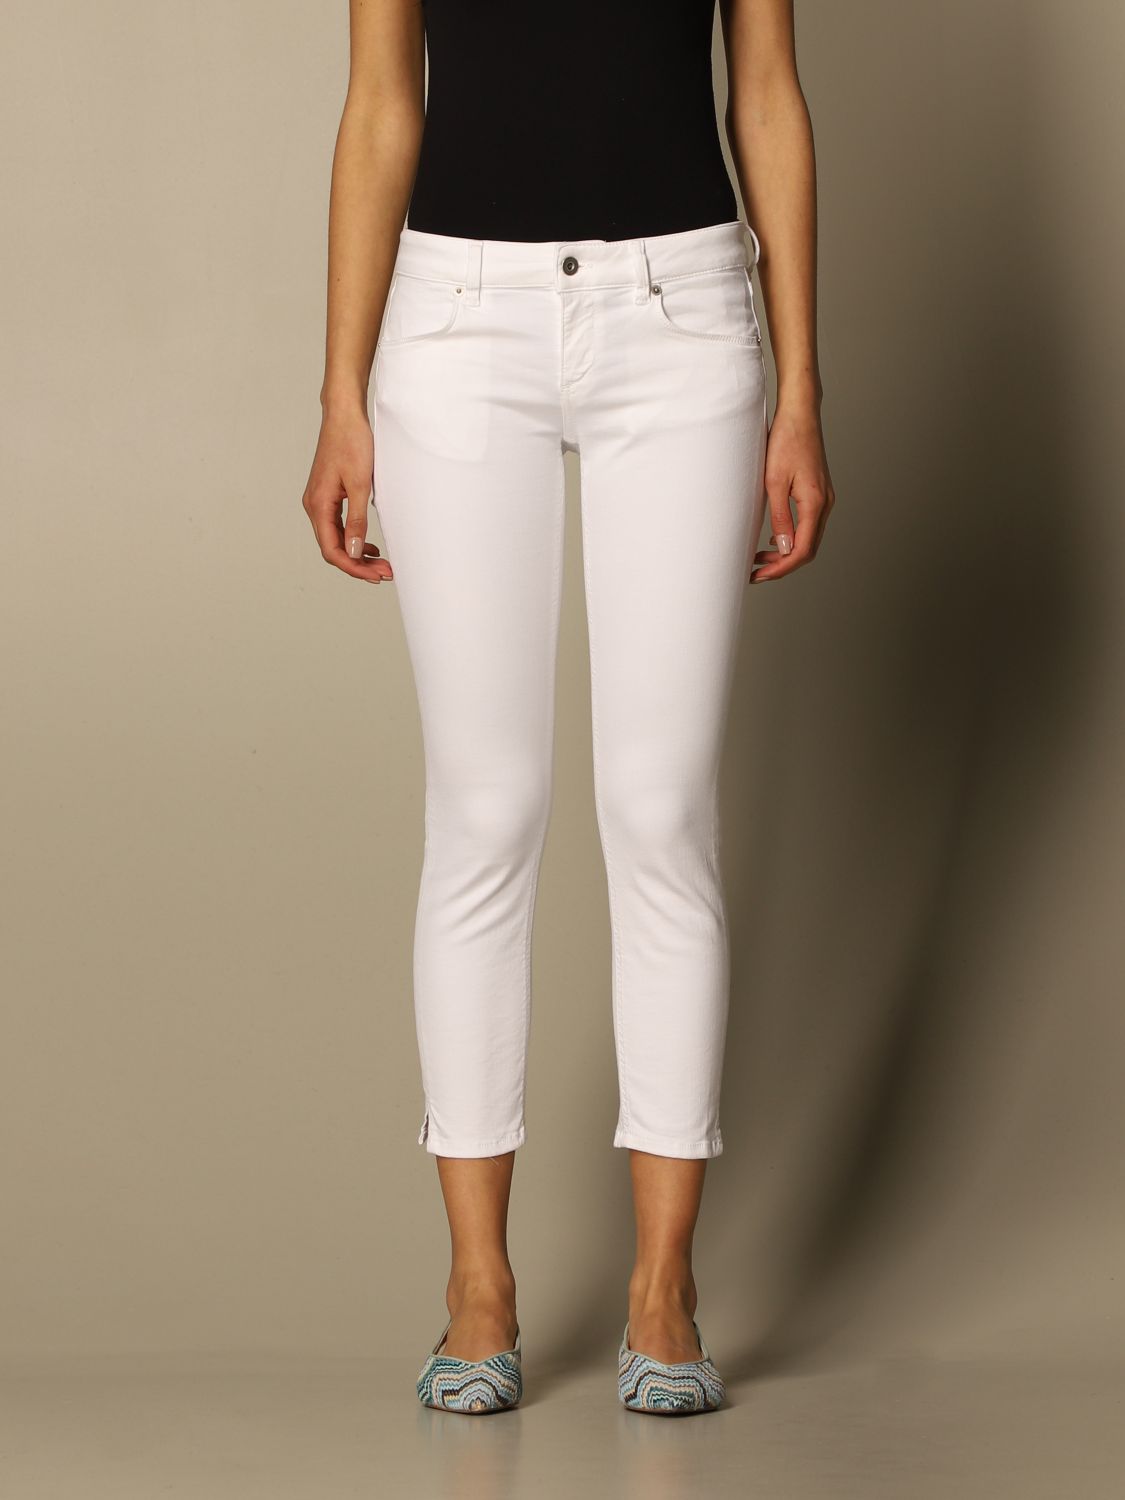 bro Start frisk Dondup Outlet: cropped jeans in denim | Jeans Dondup Women Pink | Jeans  Dondup DP560DDBS0026DPTD GIGLIO.COM